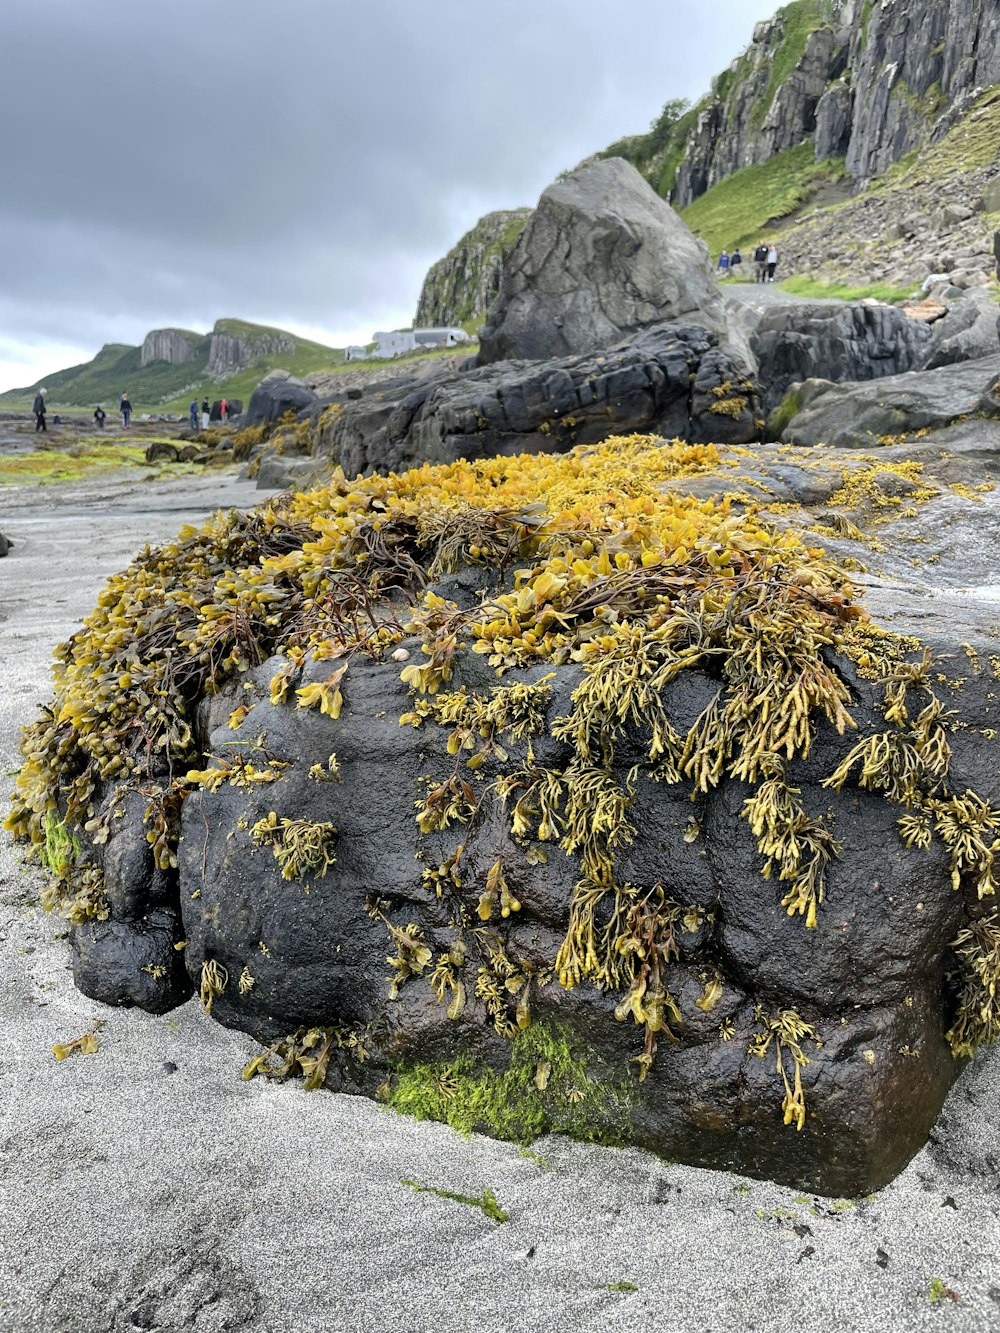 a rocky area with yellow flowers